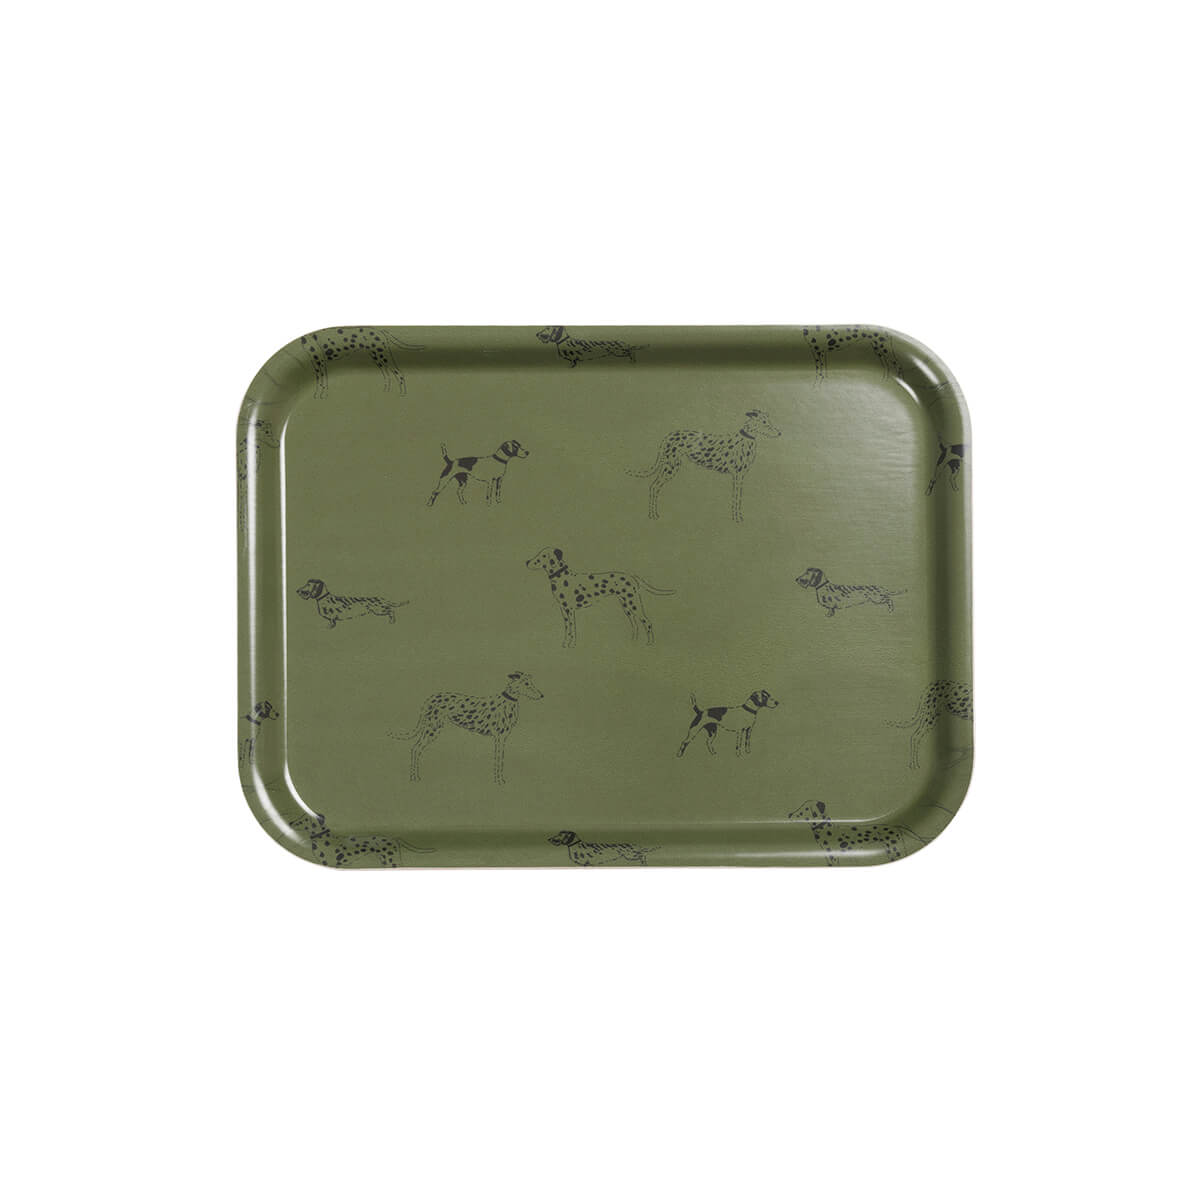 Small handmade printed tray by Sophie Allport with dog illustrations on a green background